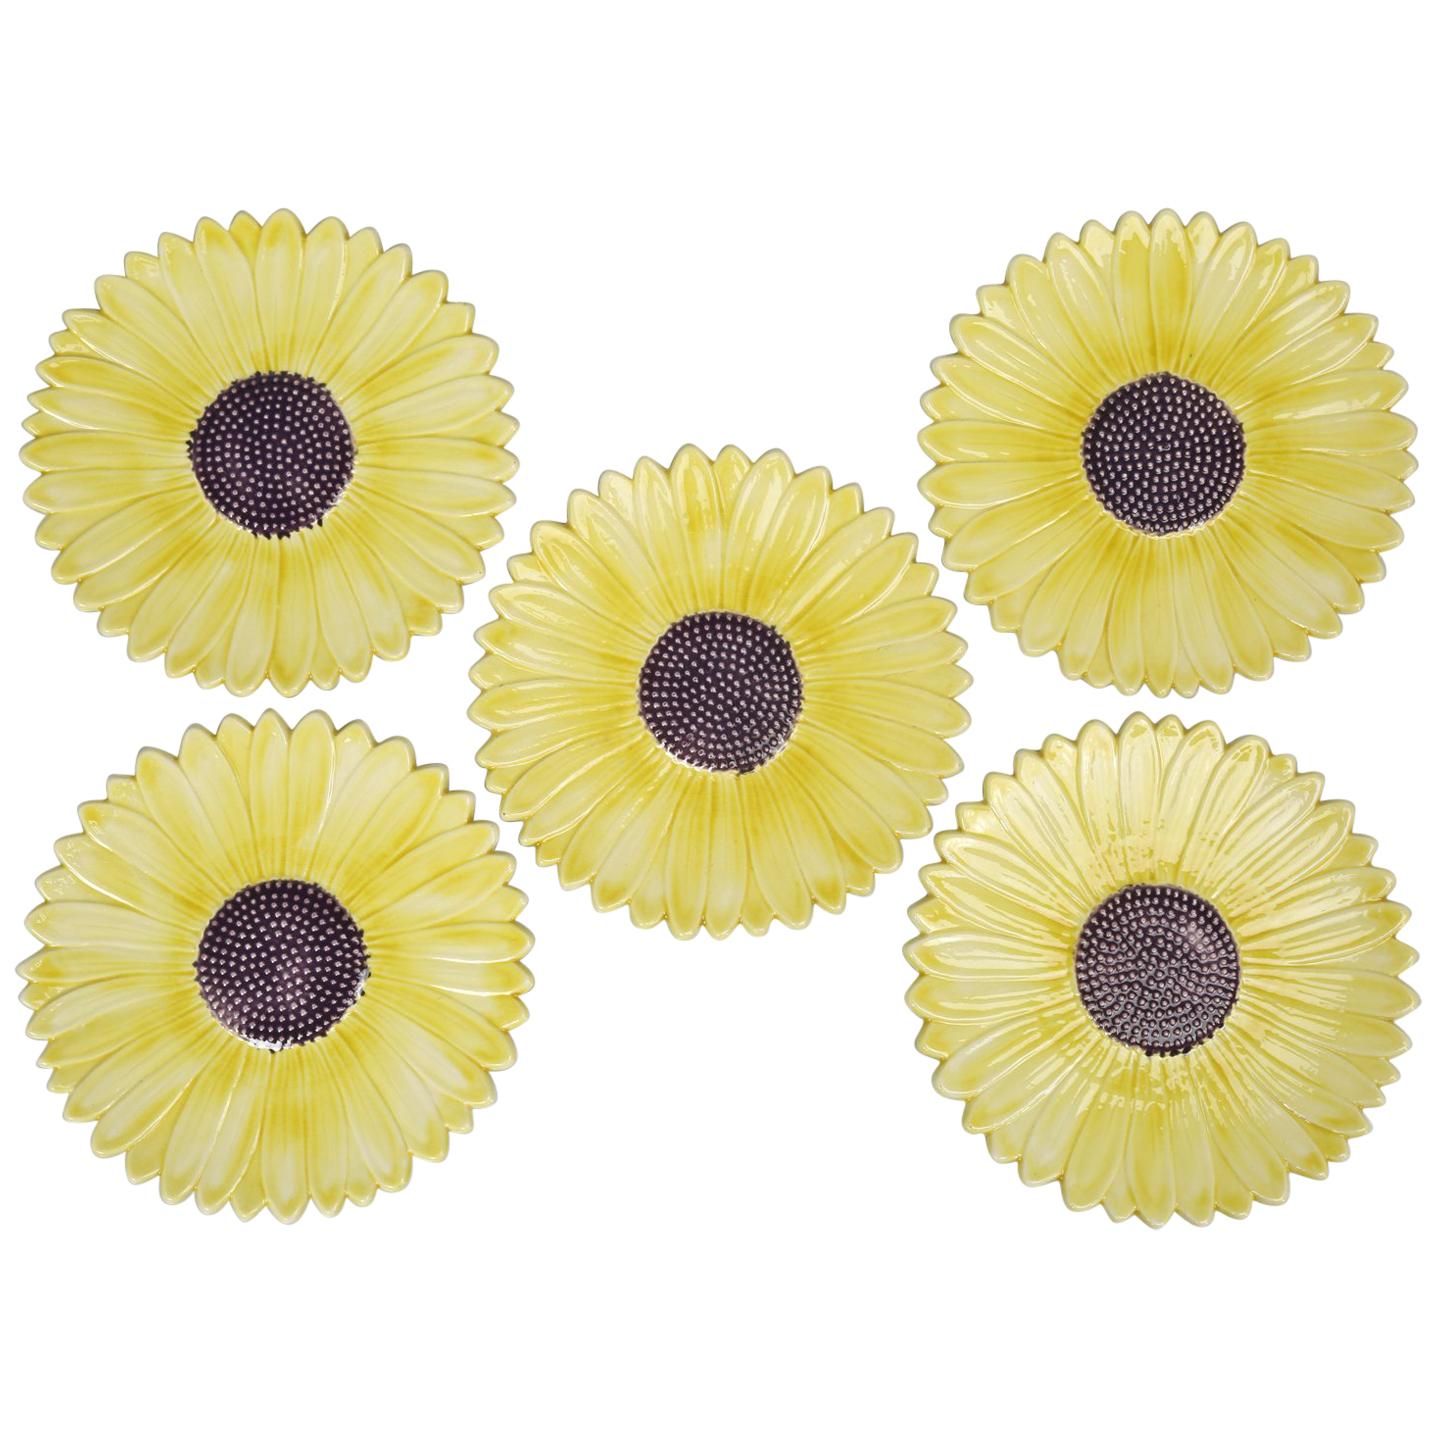 Set of 5 Sunflower Majolica Plates from the French Provence